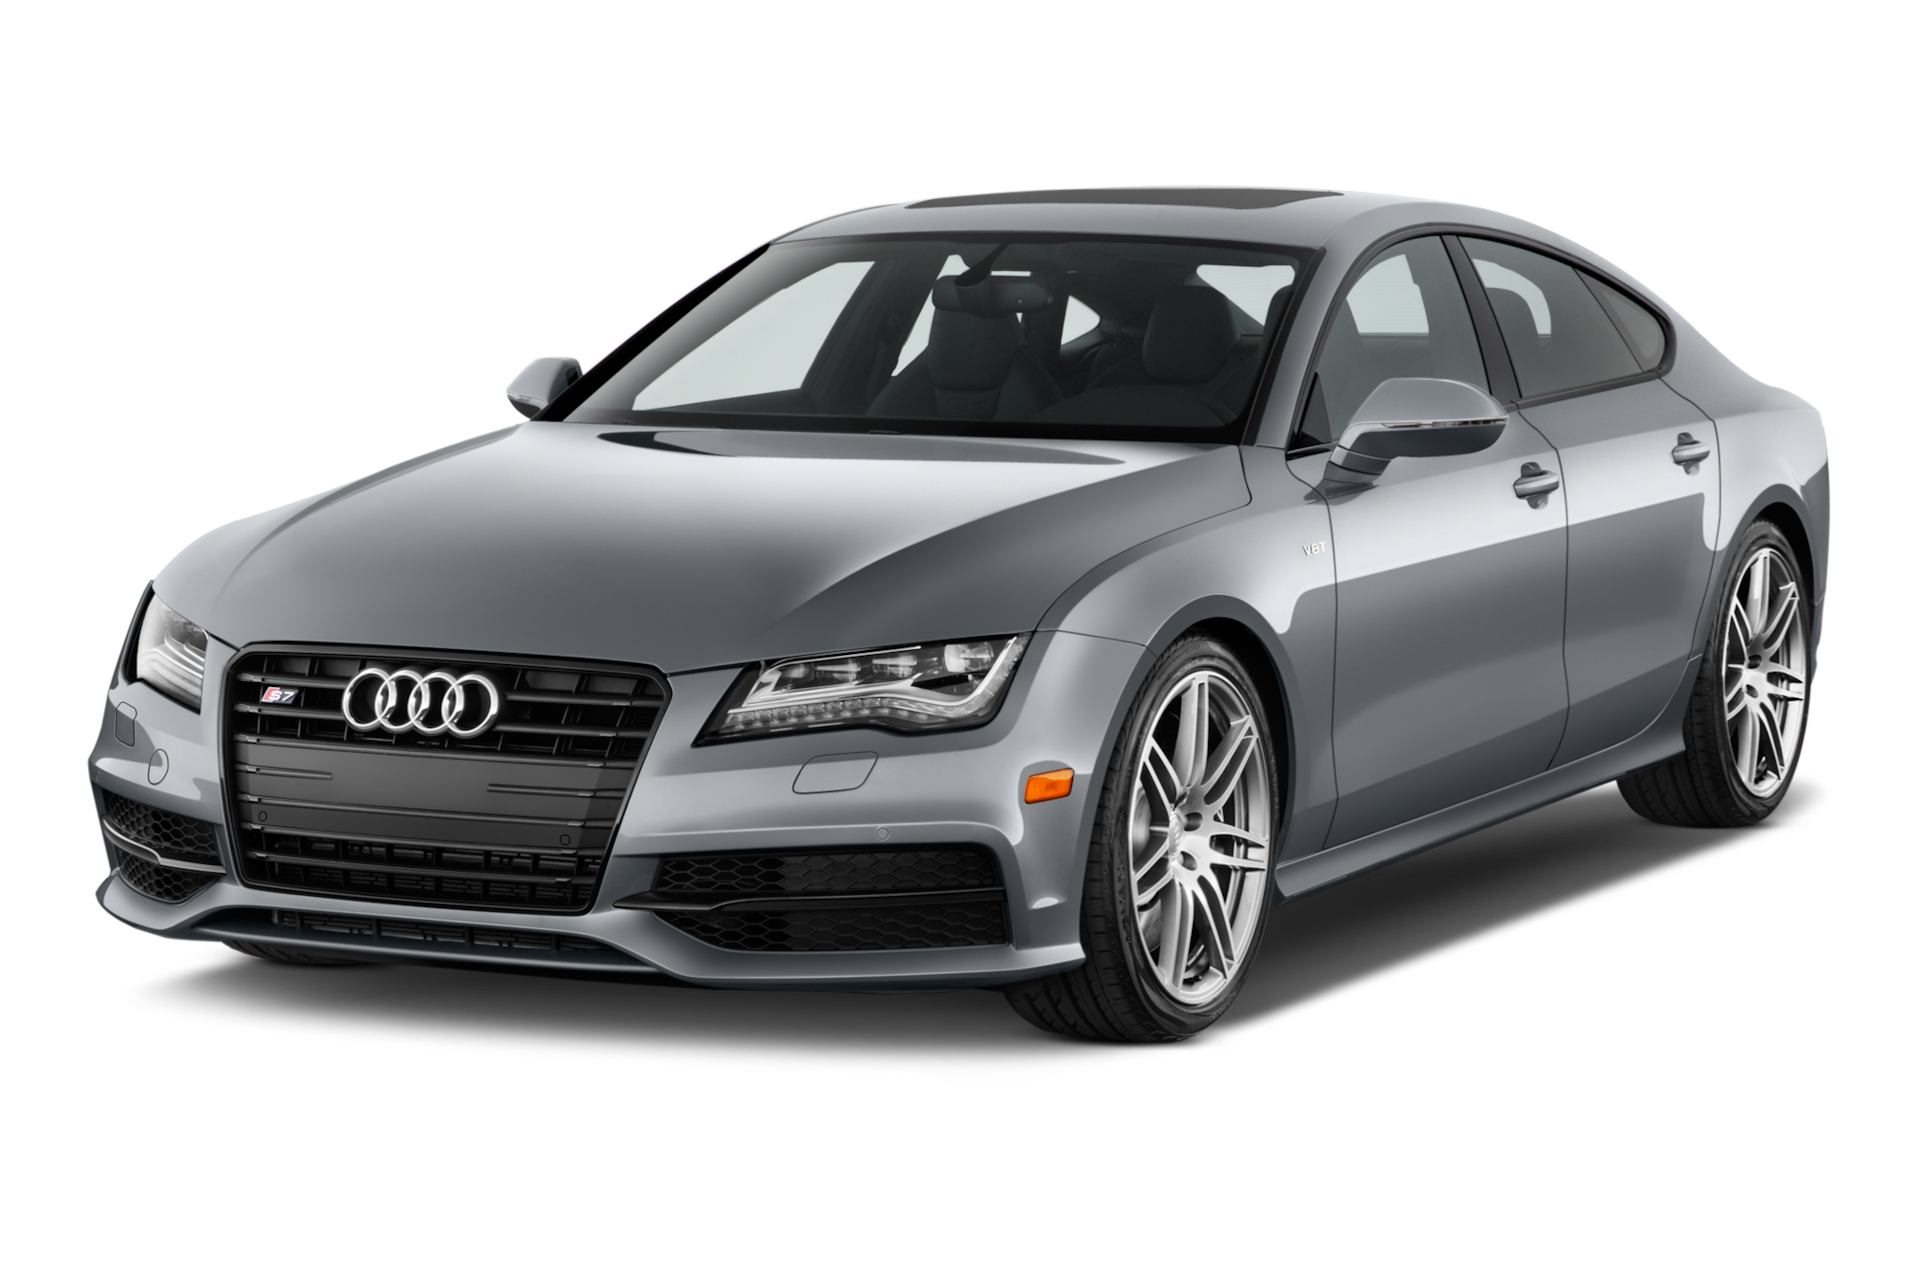 2015 Audi S7 Prices, Reviews, and Photos - MotorTrend